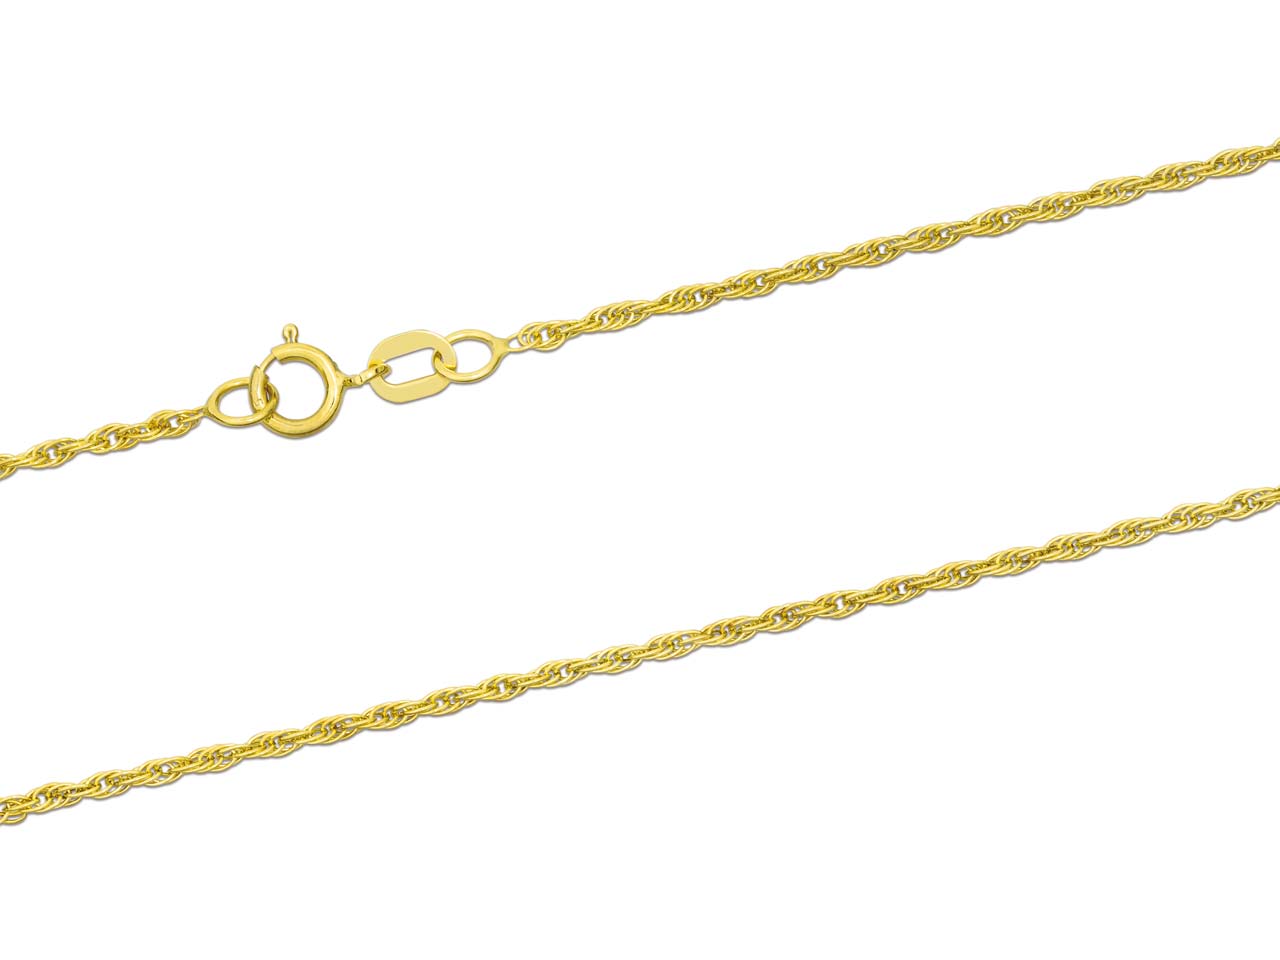 Gold rope. Golden Rope. 20 Inch Gold Rope Chain. Golden Rope PNG.